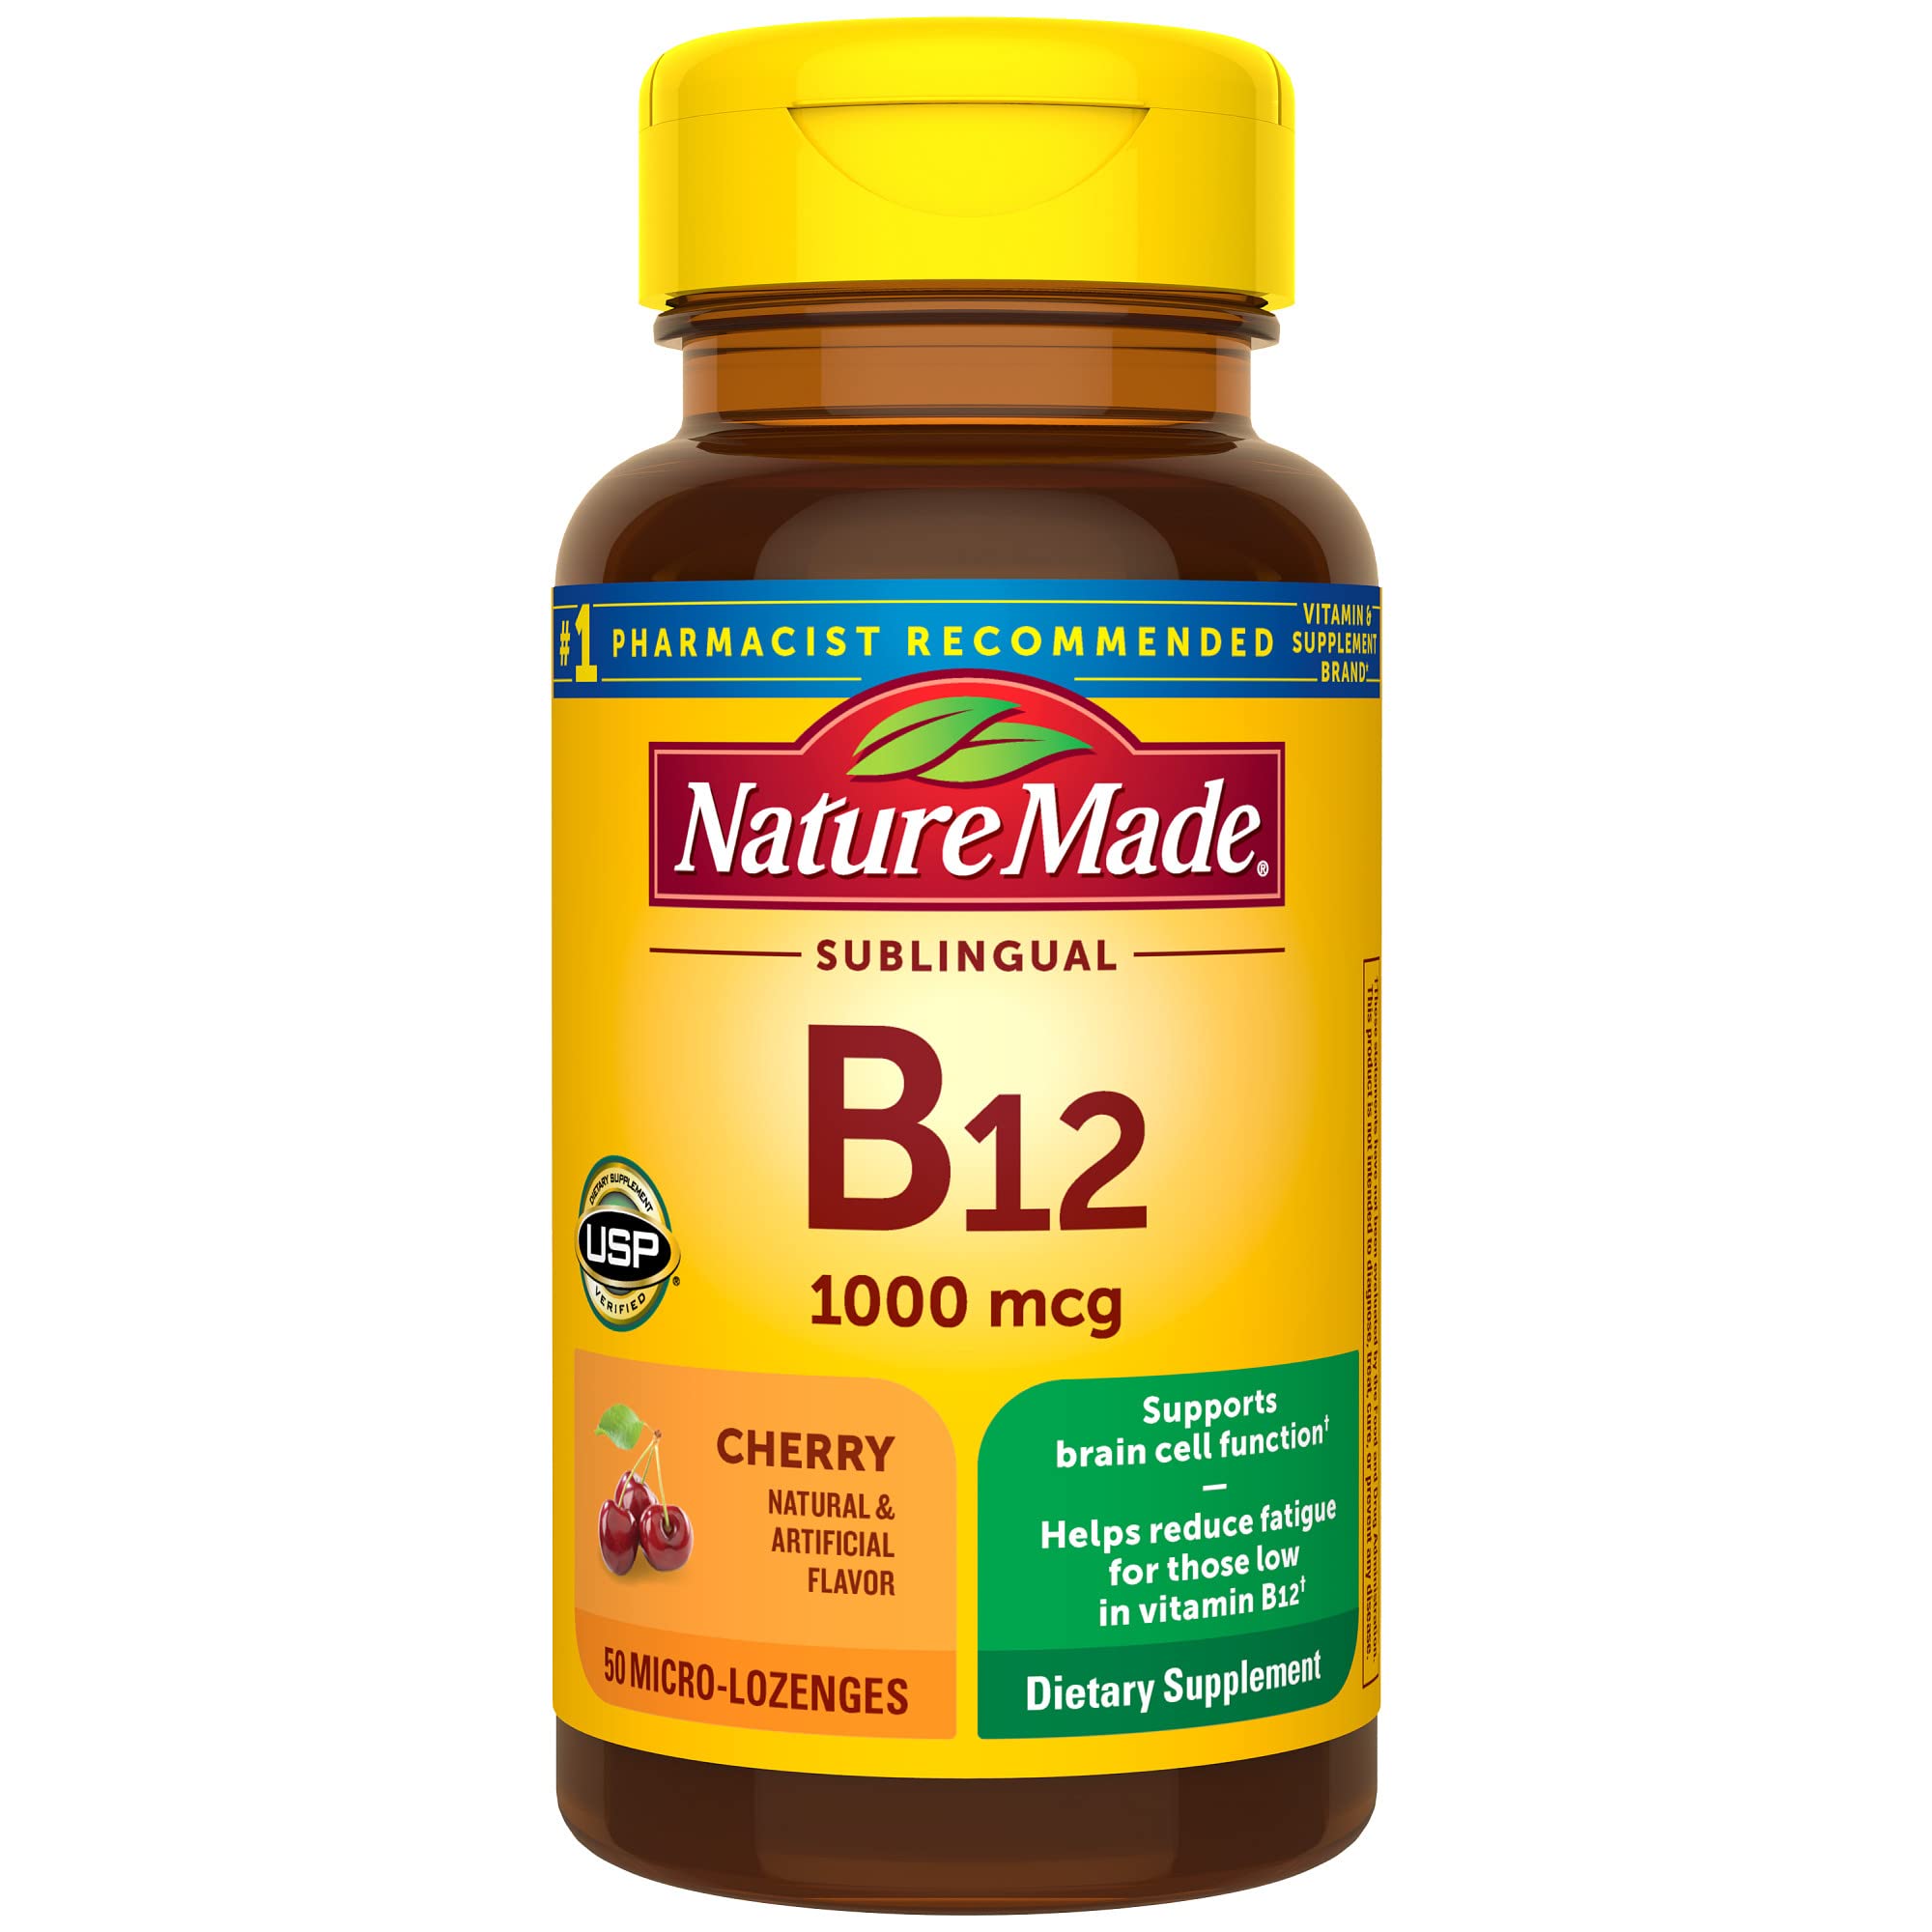 Nature Made Vitamin B12 Sublingual, Easy to Take Vitamin B12 1000 mcg for Energy Metabolism Support, 50 Sugar Free Micro-Lozenges, 50 Day Supply